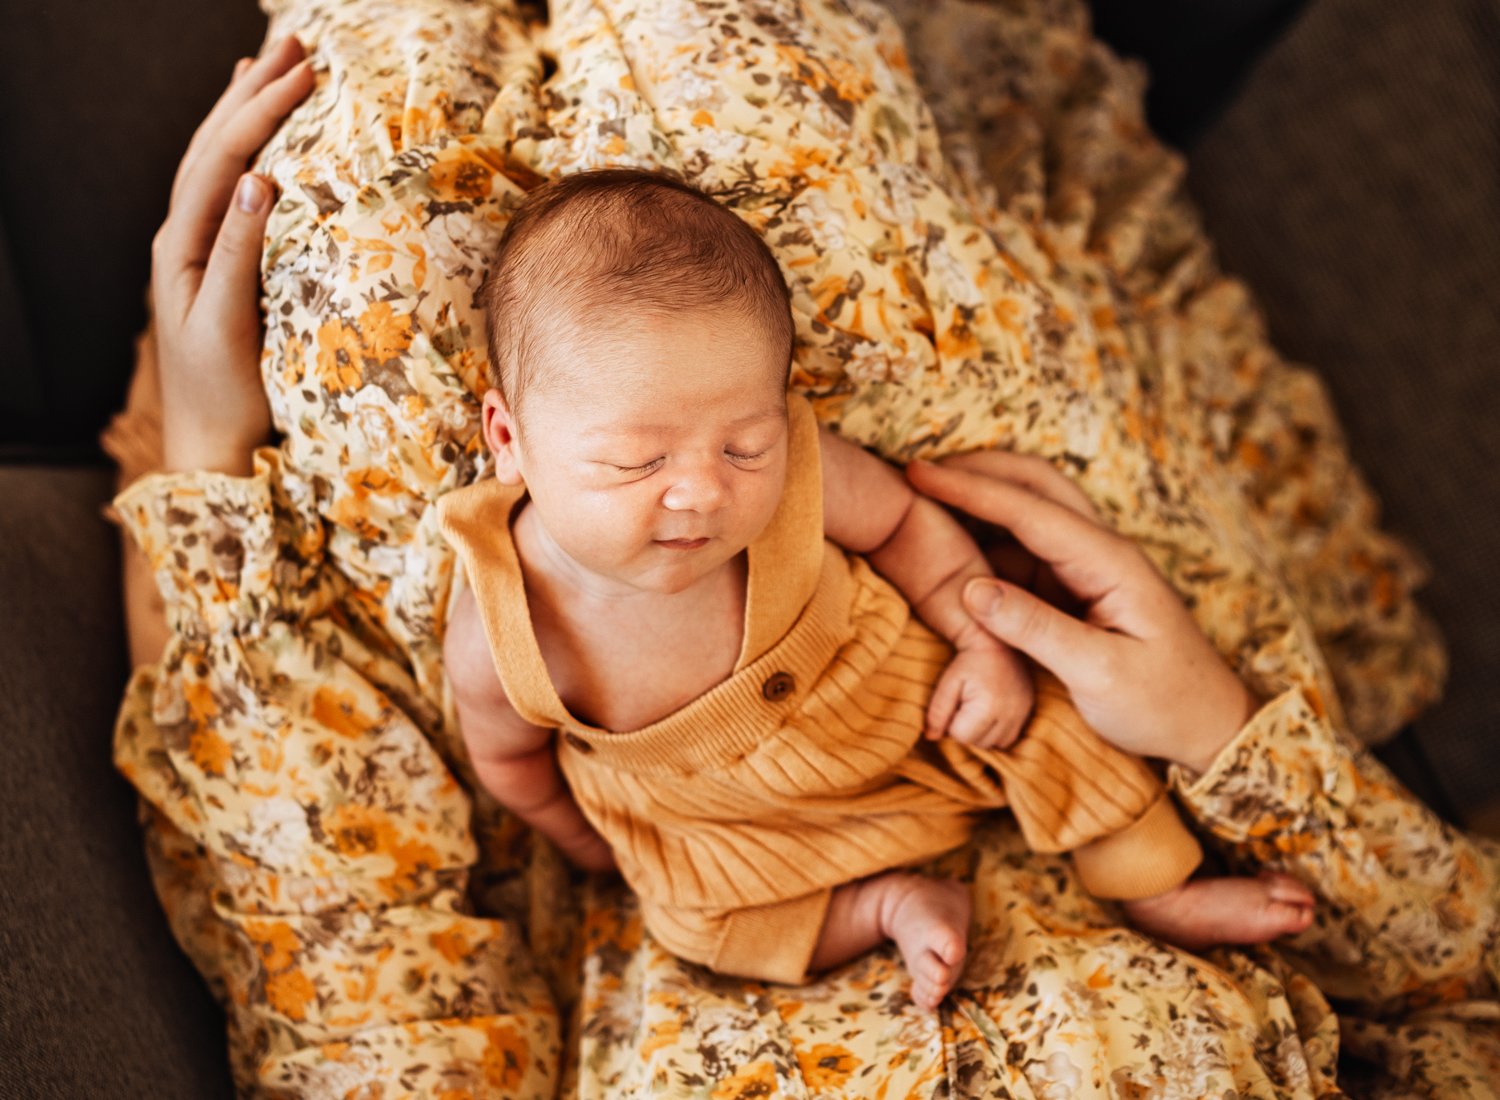 in-home-lifestyle-newborn-photography-session-ramstein-germany (11).jpg